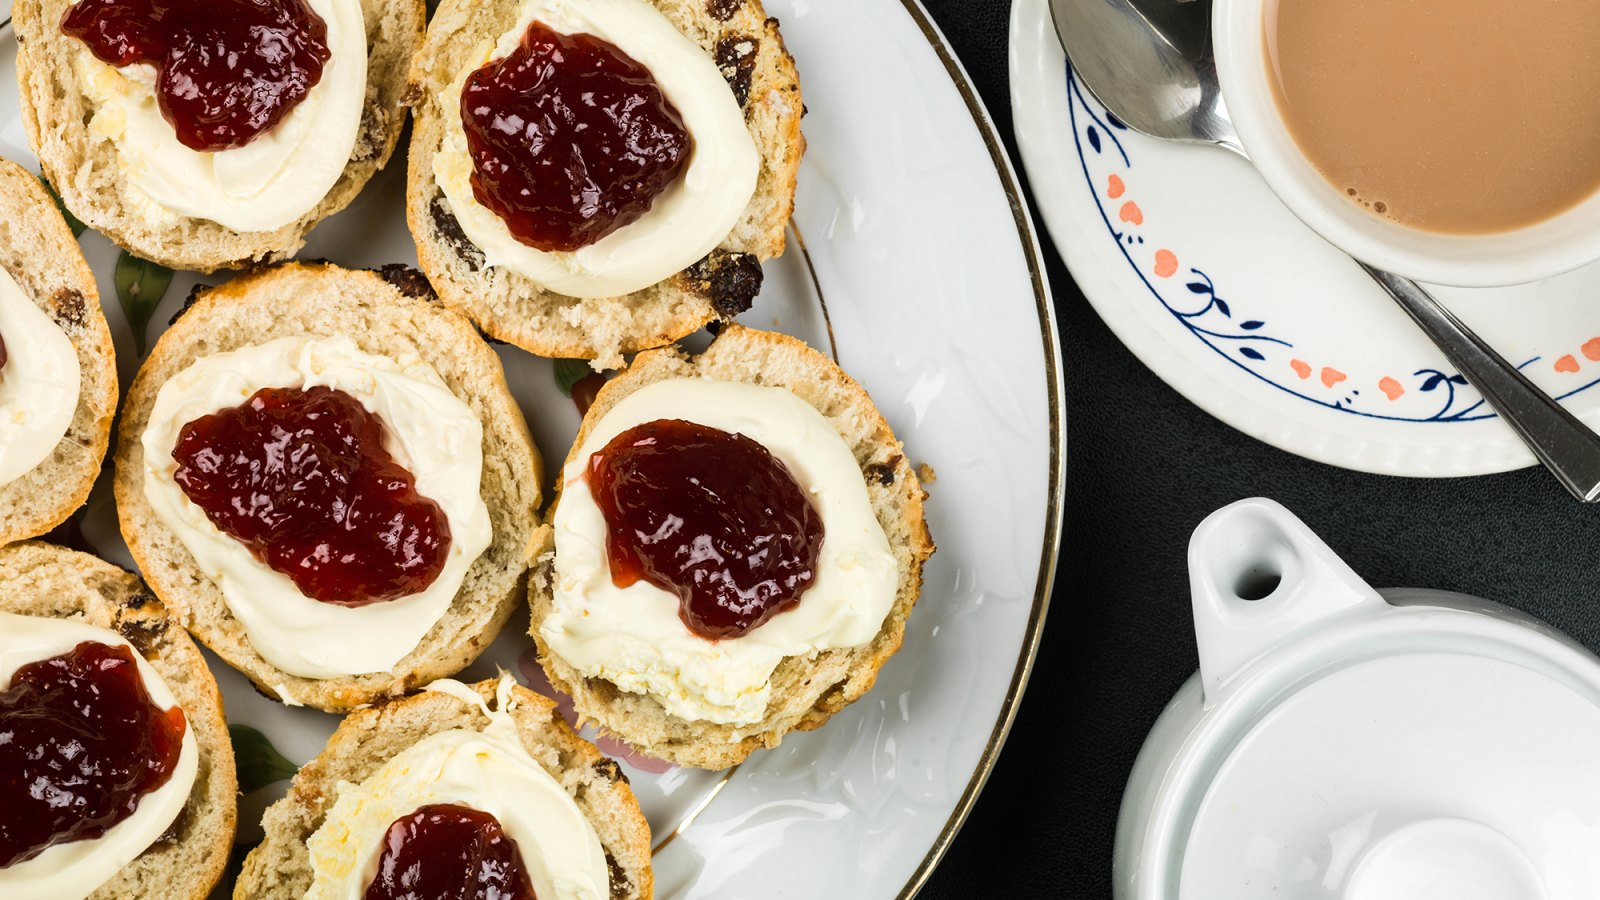 Buckingham Palace Shares 'Royal' Recipe for Fruit Scones: See How to Make the British Classic